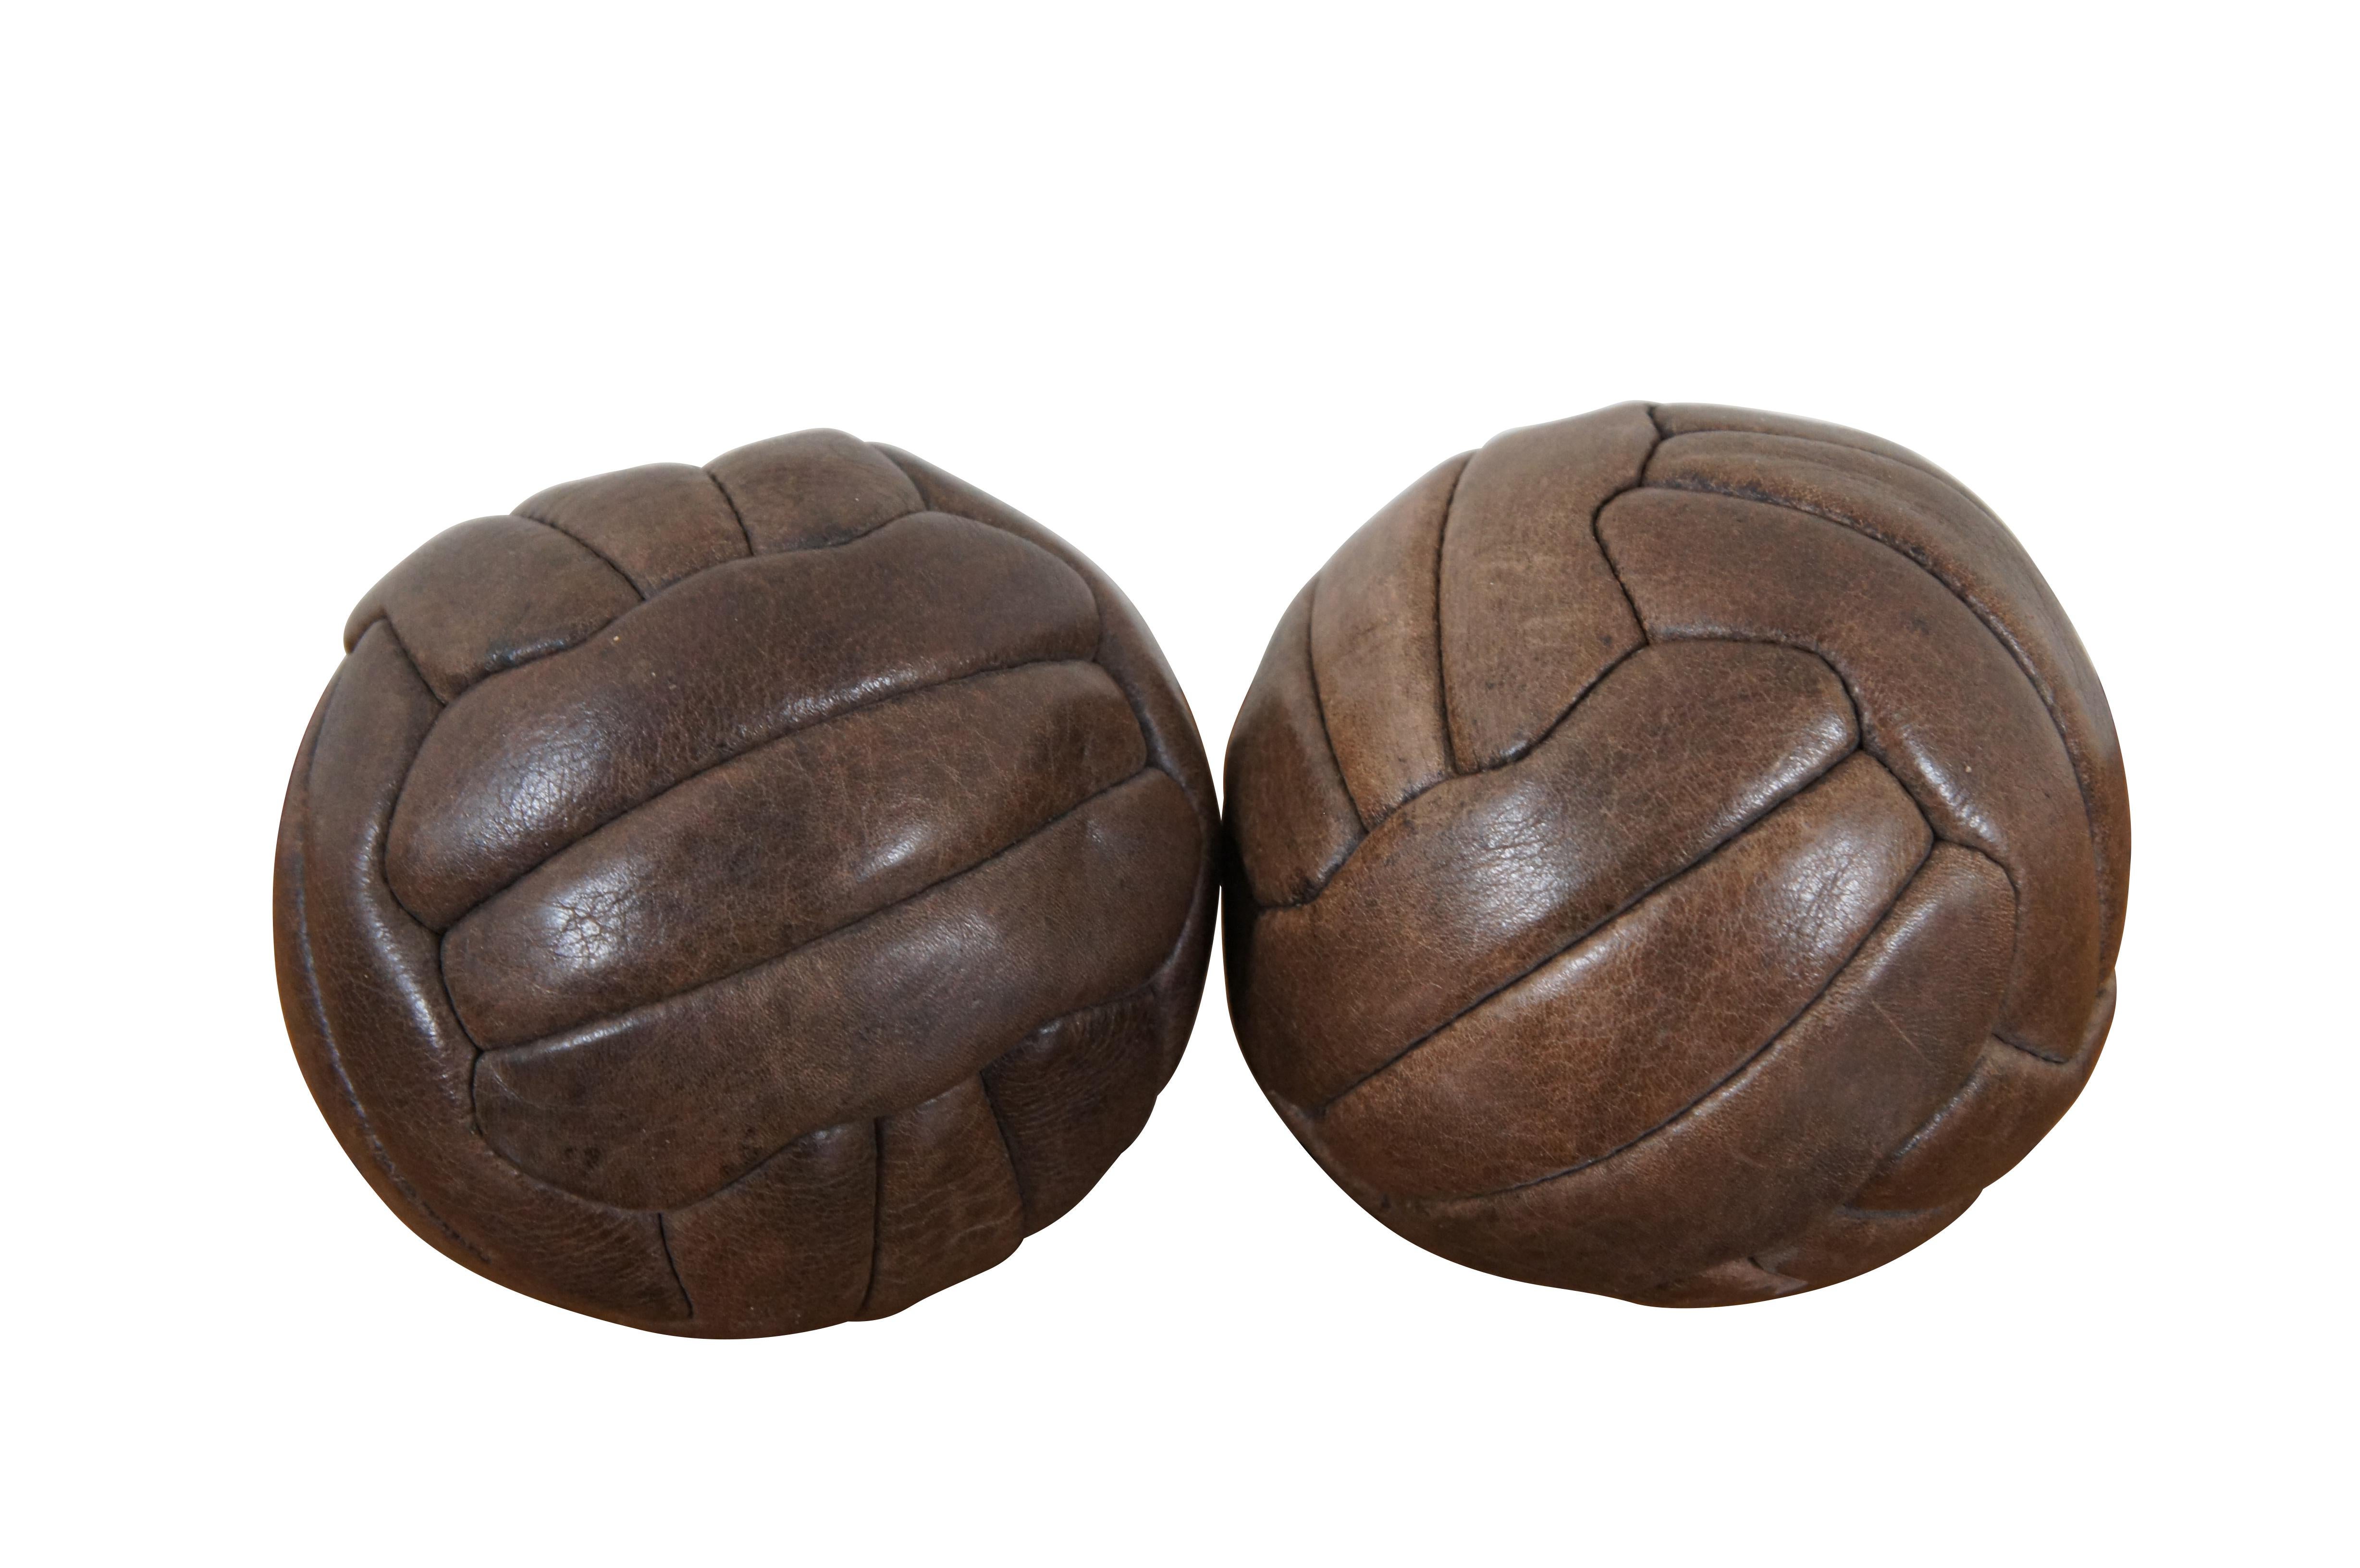 Pair of circa 1930s brown leather footballs / soccer balls manufactured by Mark Cross Company. Made in England.

Dimensions:
5.5